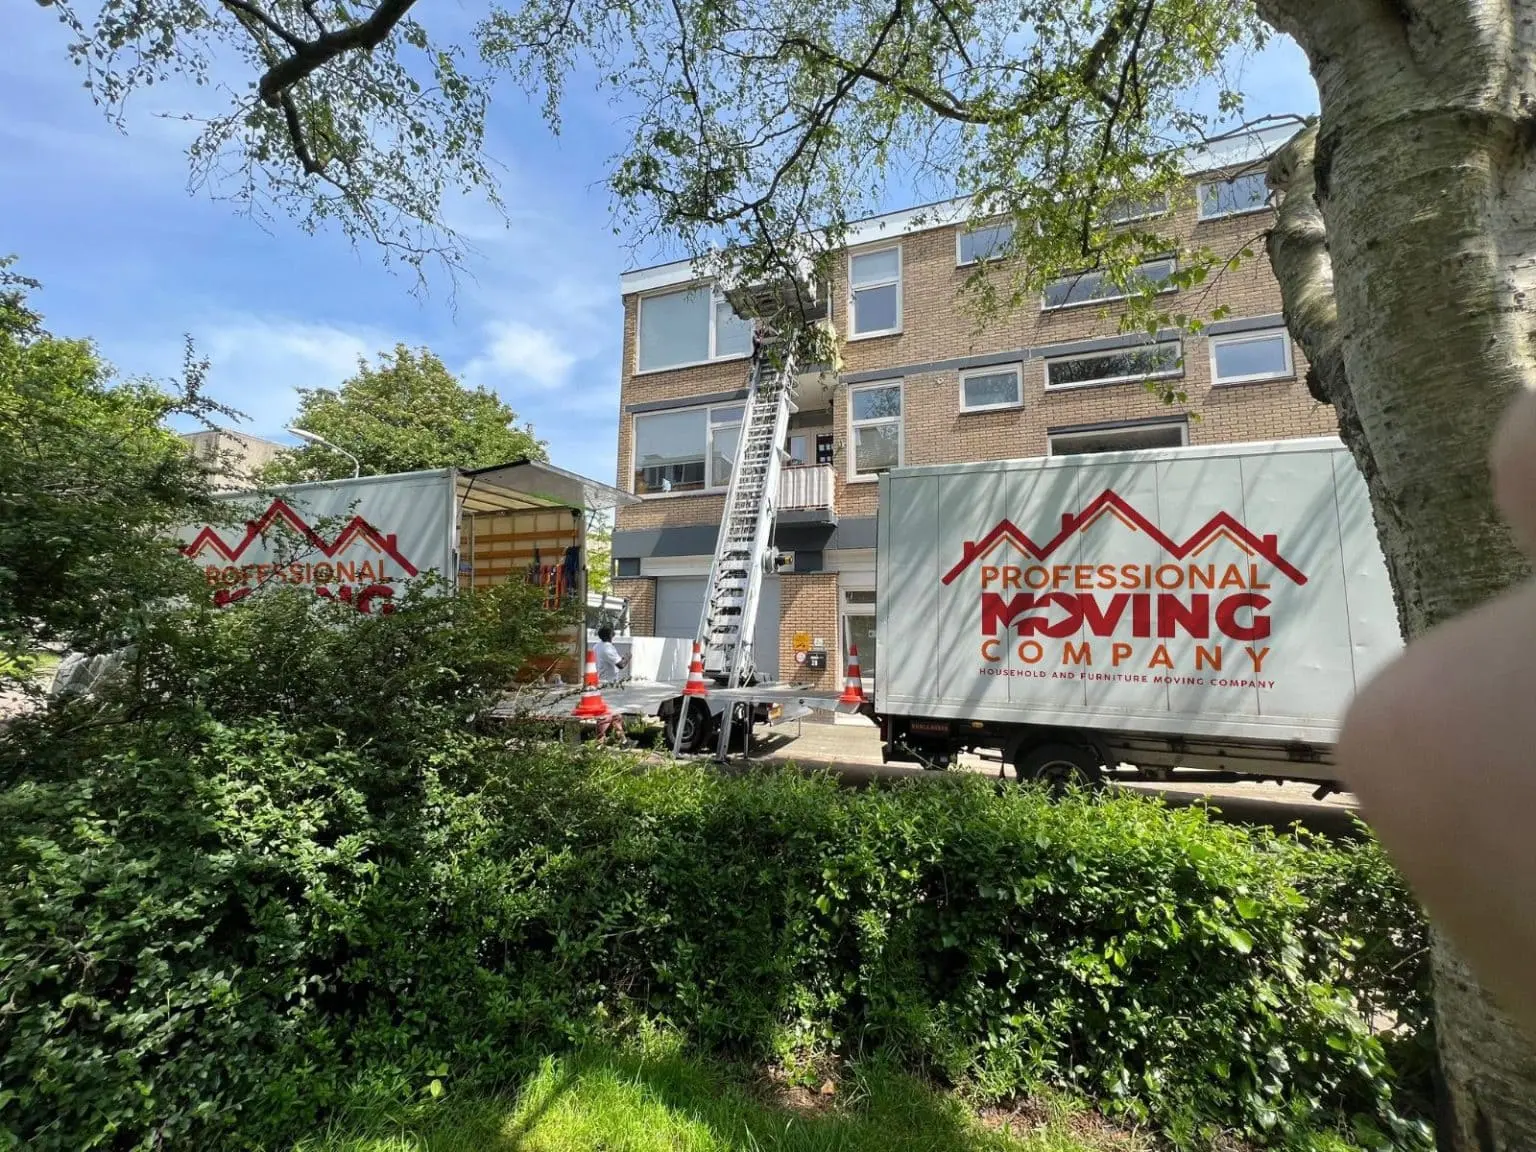 Moving Company Papendrecht | Company Moving Tips from Professional Moving Company in Papendrecht